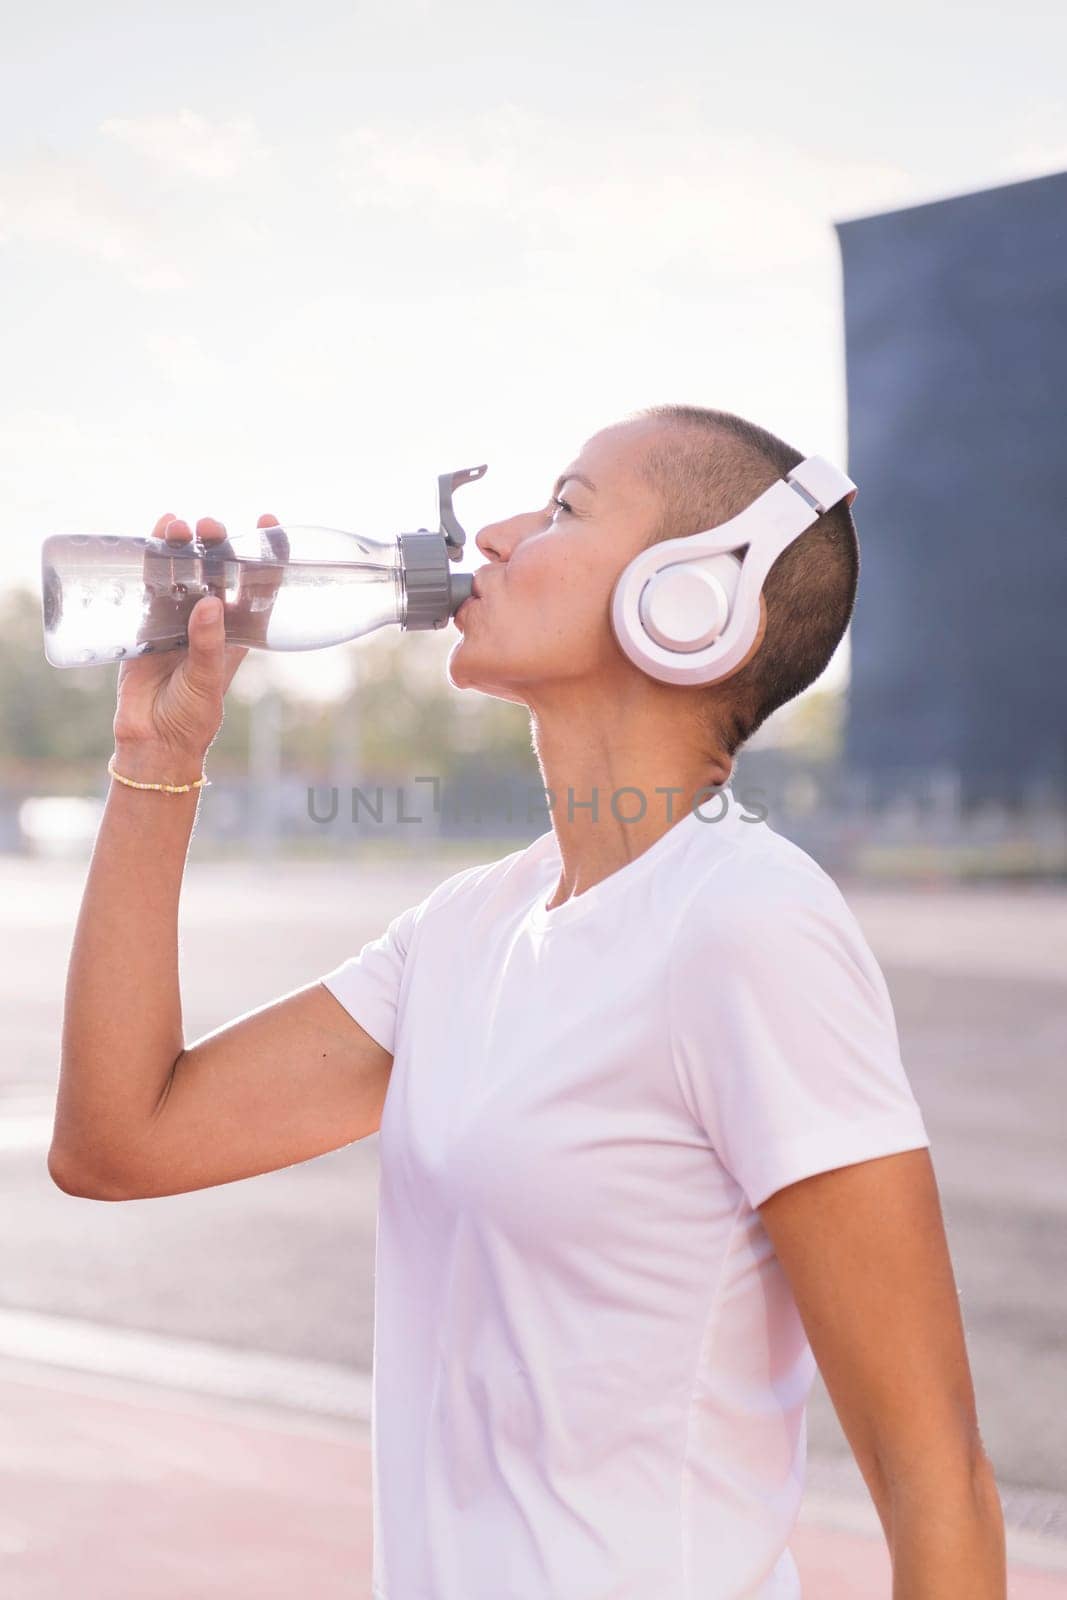 young sports woman drinking water from her bottle and listening to music on her headphones, concept of active and healthy lifestyle, copy space for text